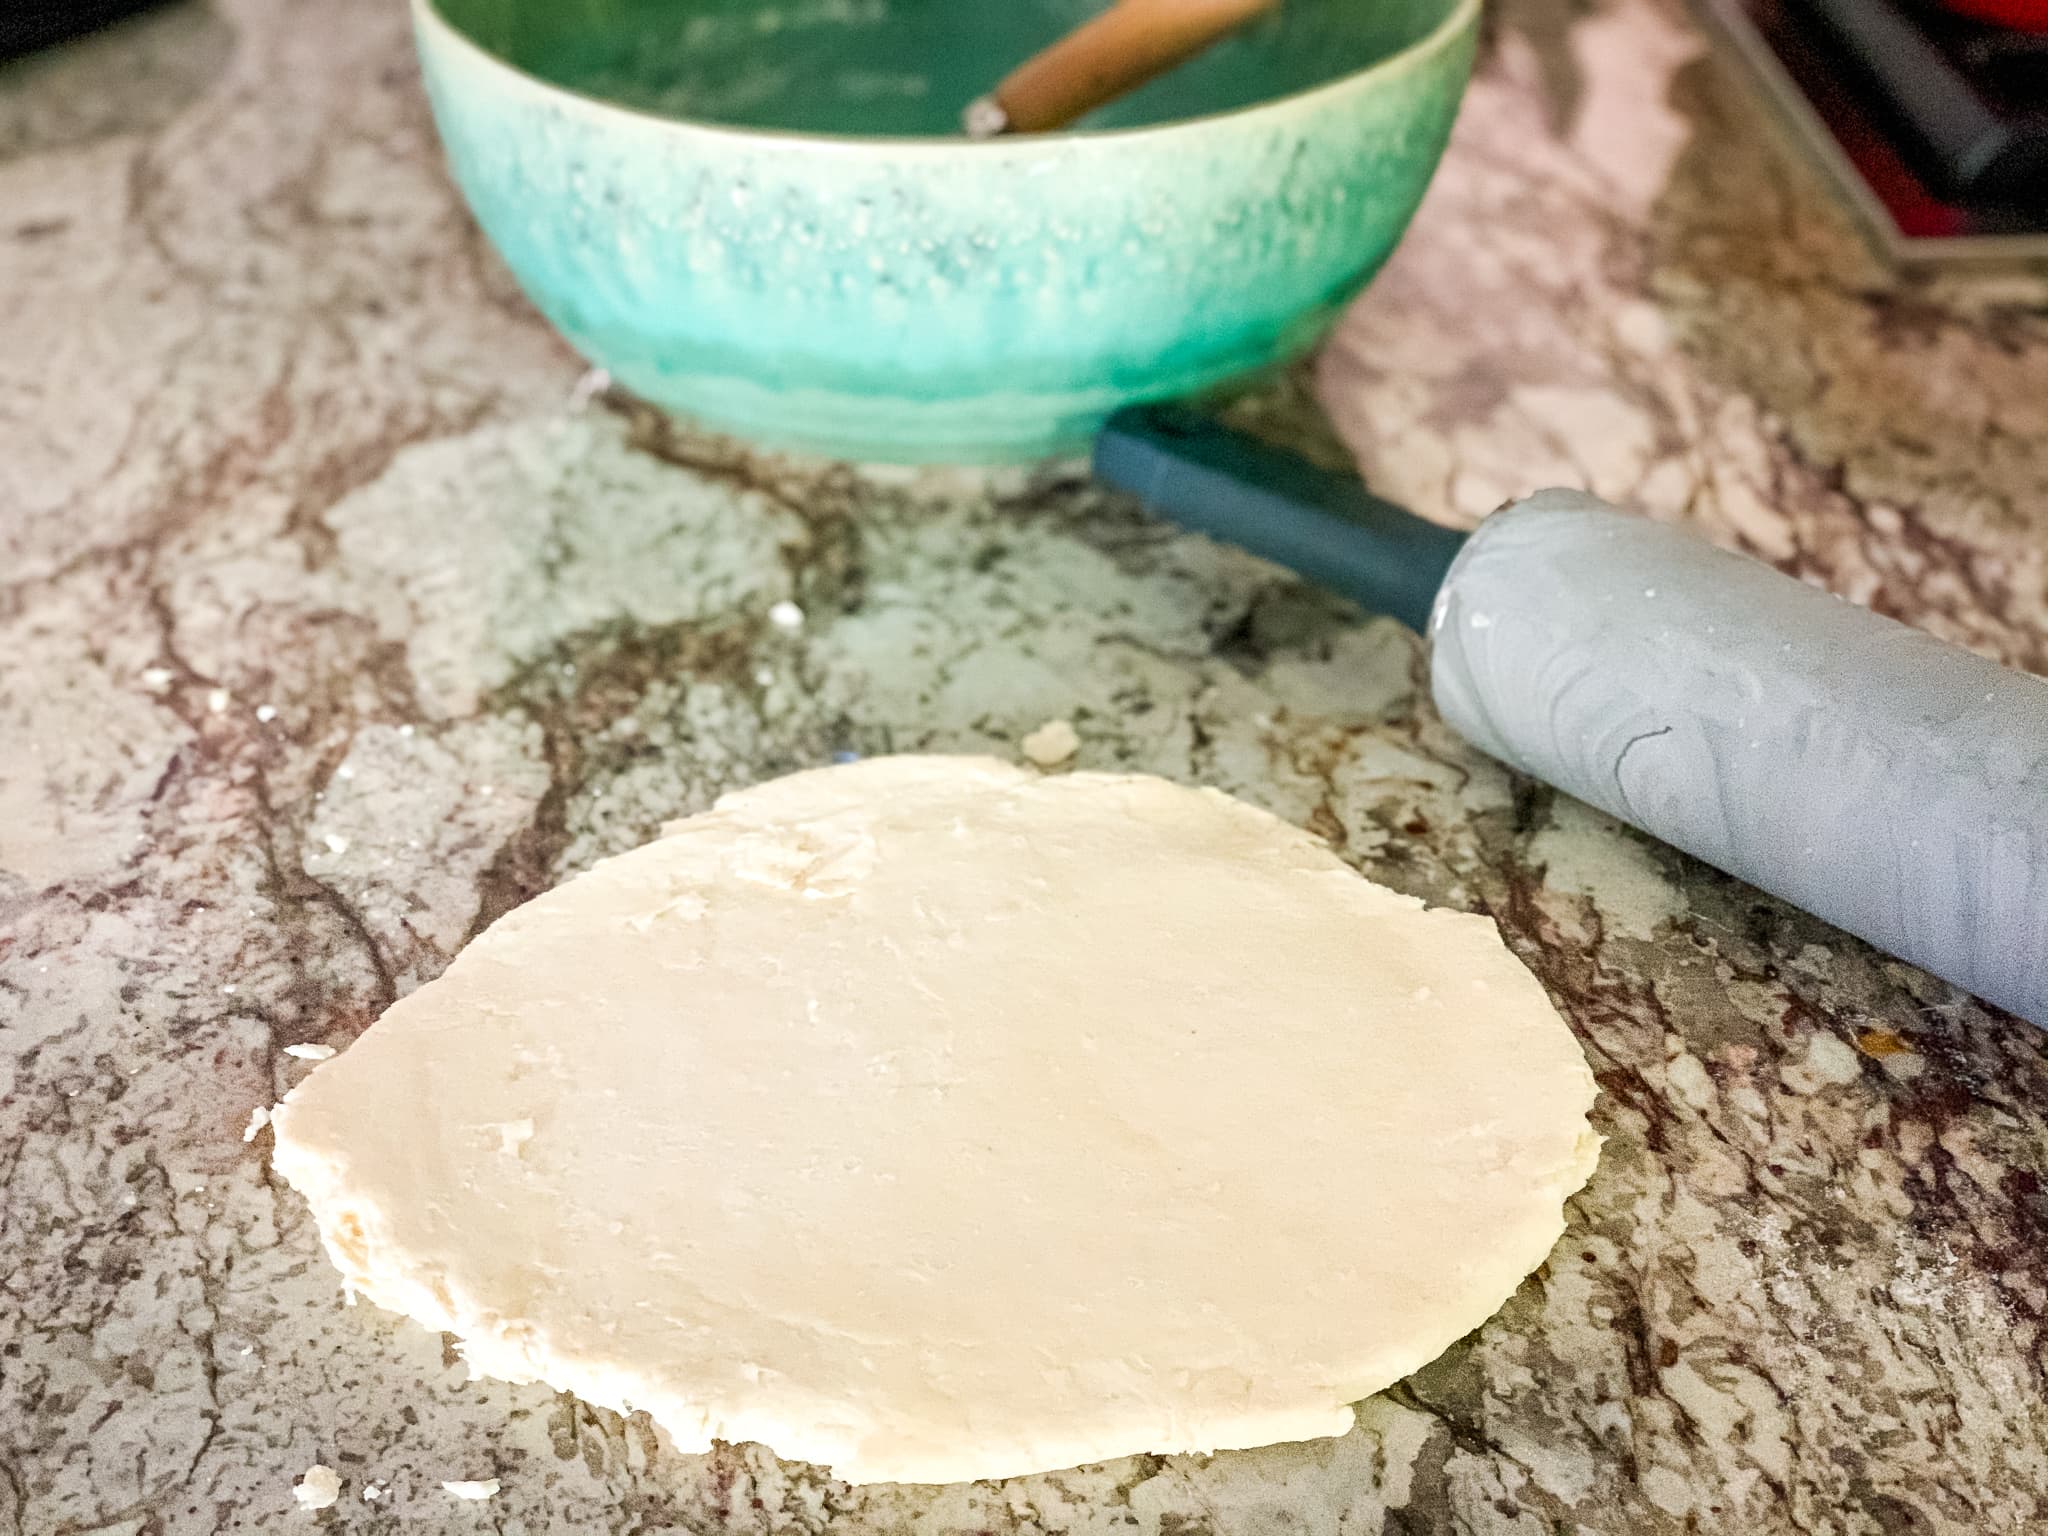 Circle of pastry dough next to a rolling pin on marble counter top.